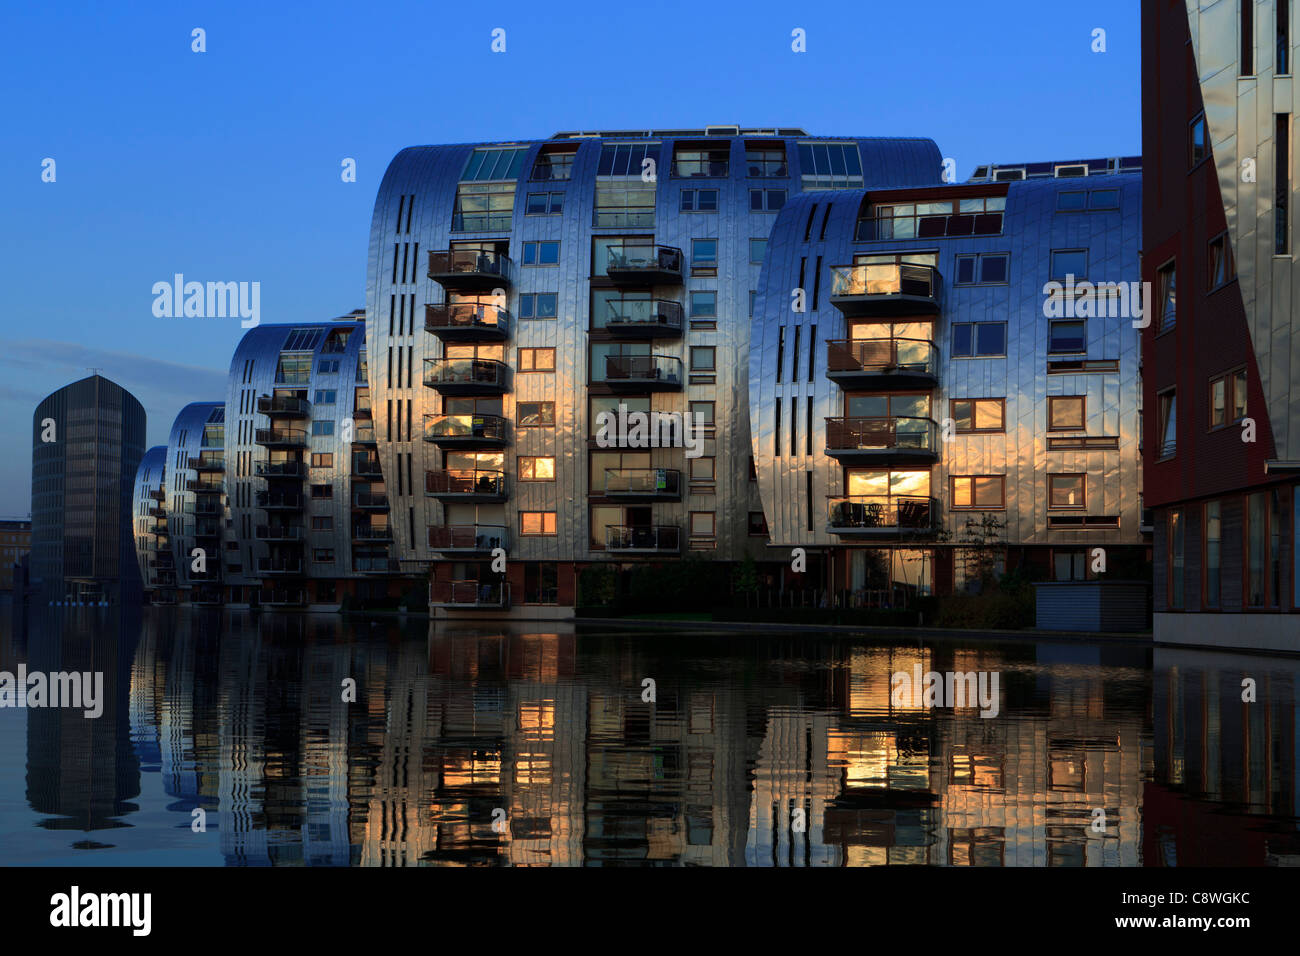 The Armada apartment buildings in the Paleiskwartier area of Den Bosch in the Netherlands, as designed by Anthony McGuirk Stock Photo